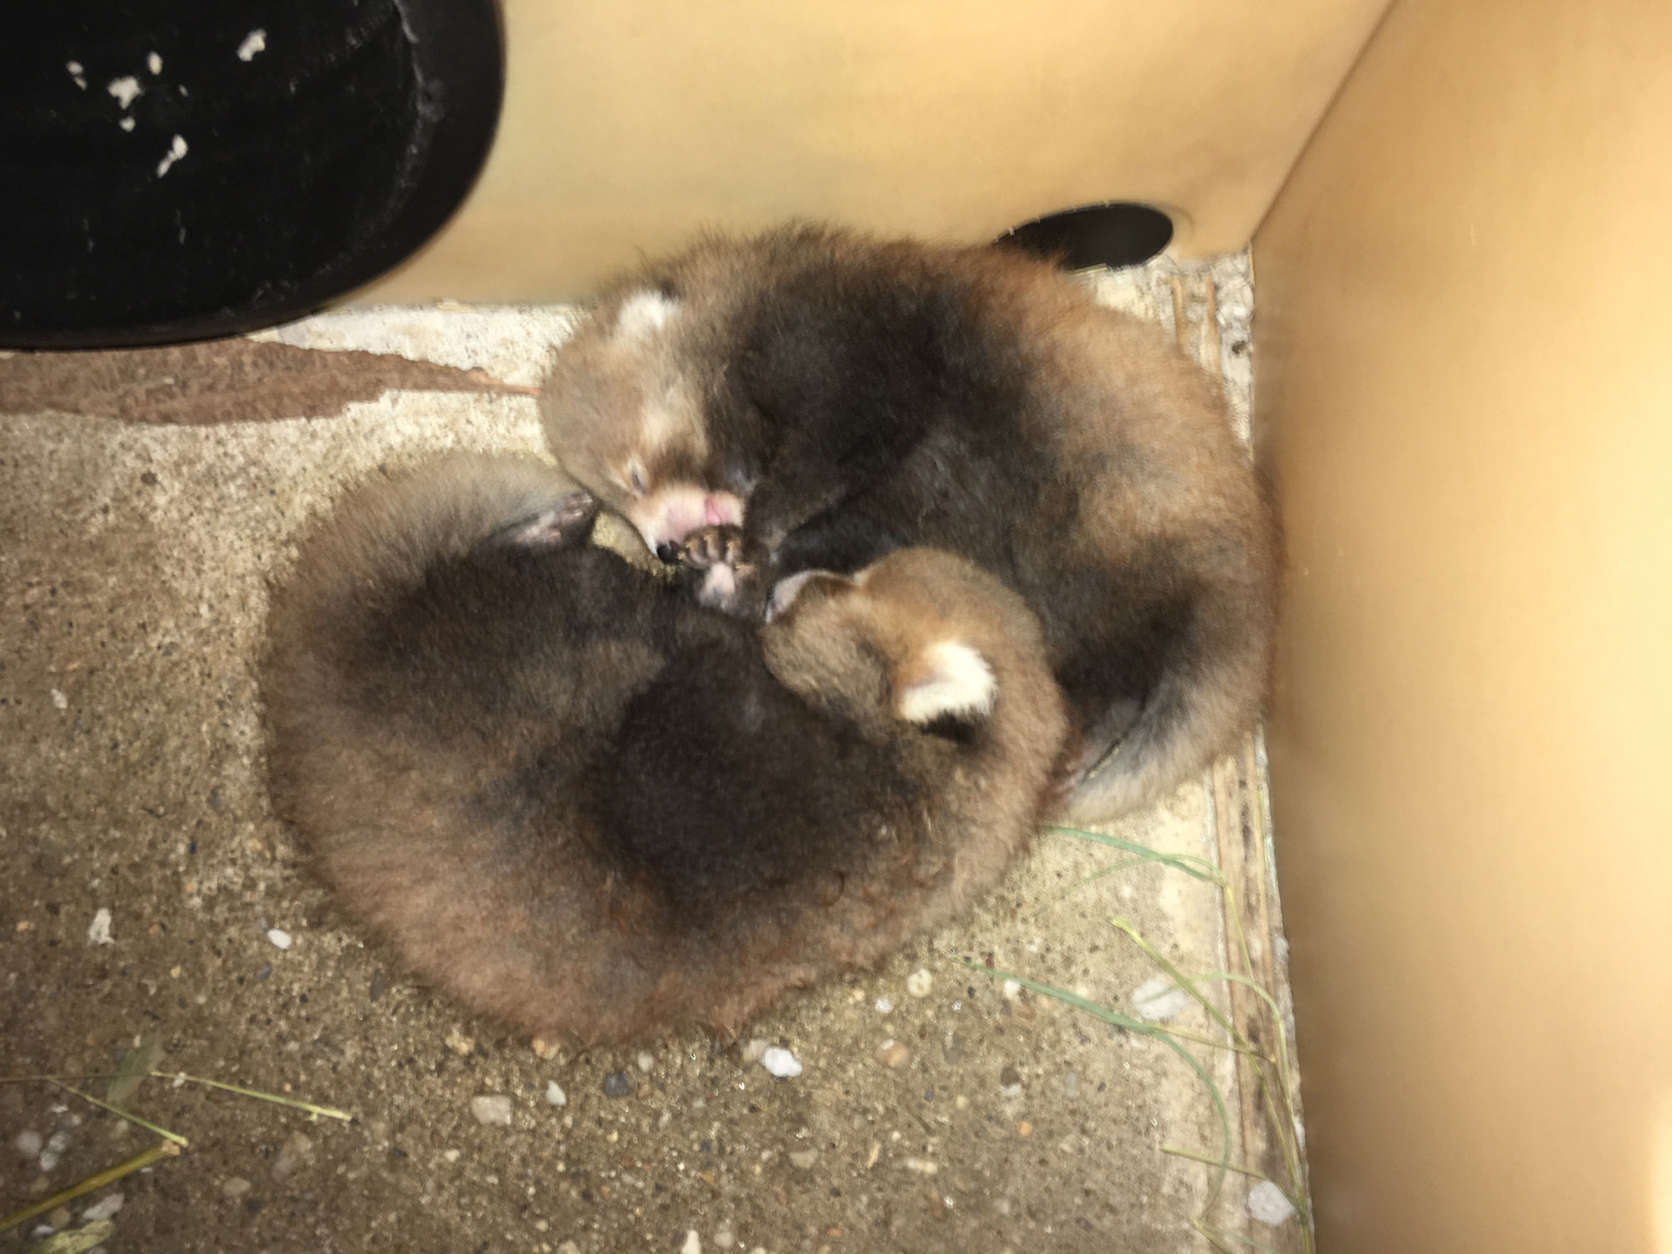 Nutmeg’s cubs in their nest box. (Smithsonian Conservation Biology Institute/Jessica Kordell)